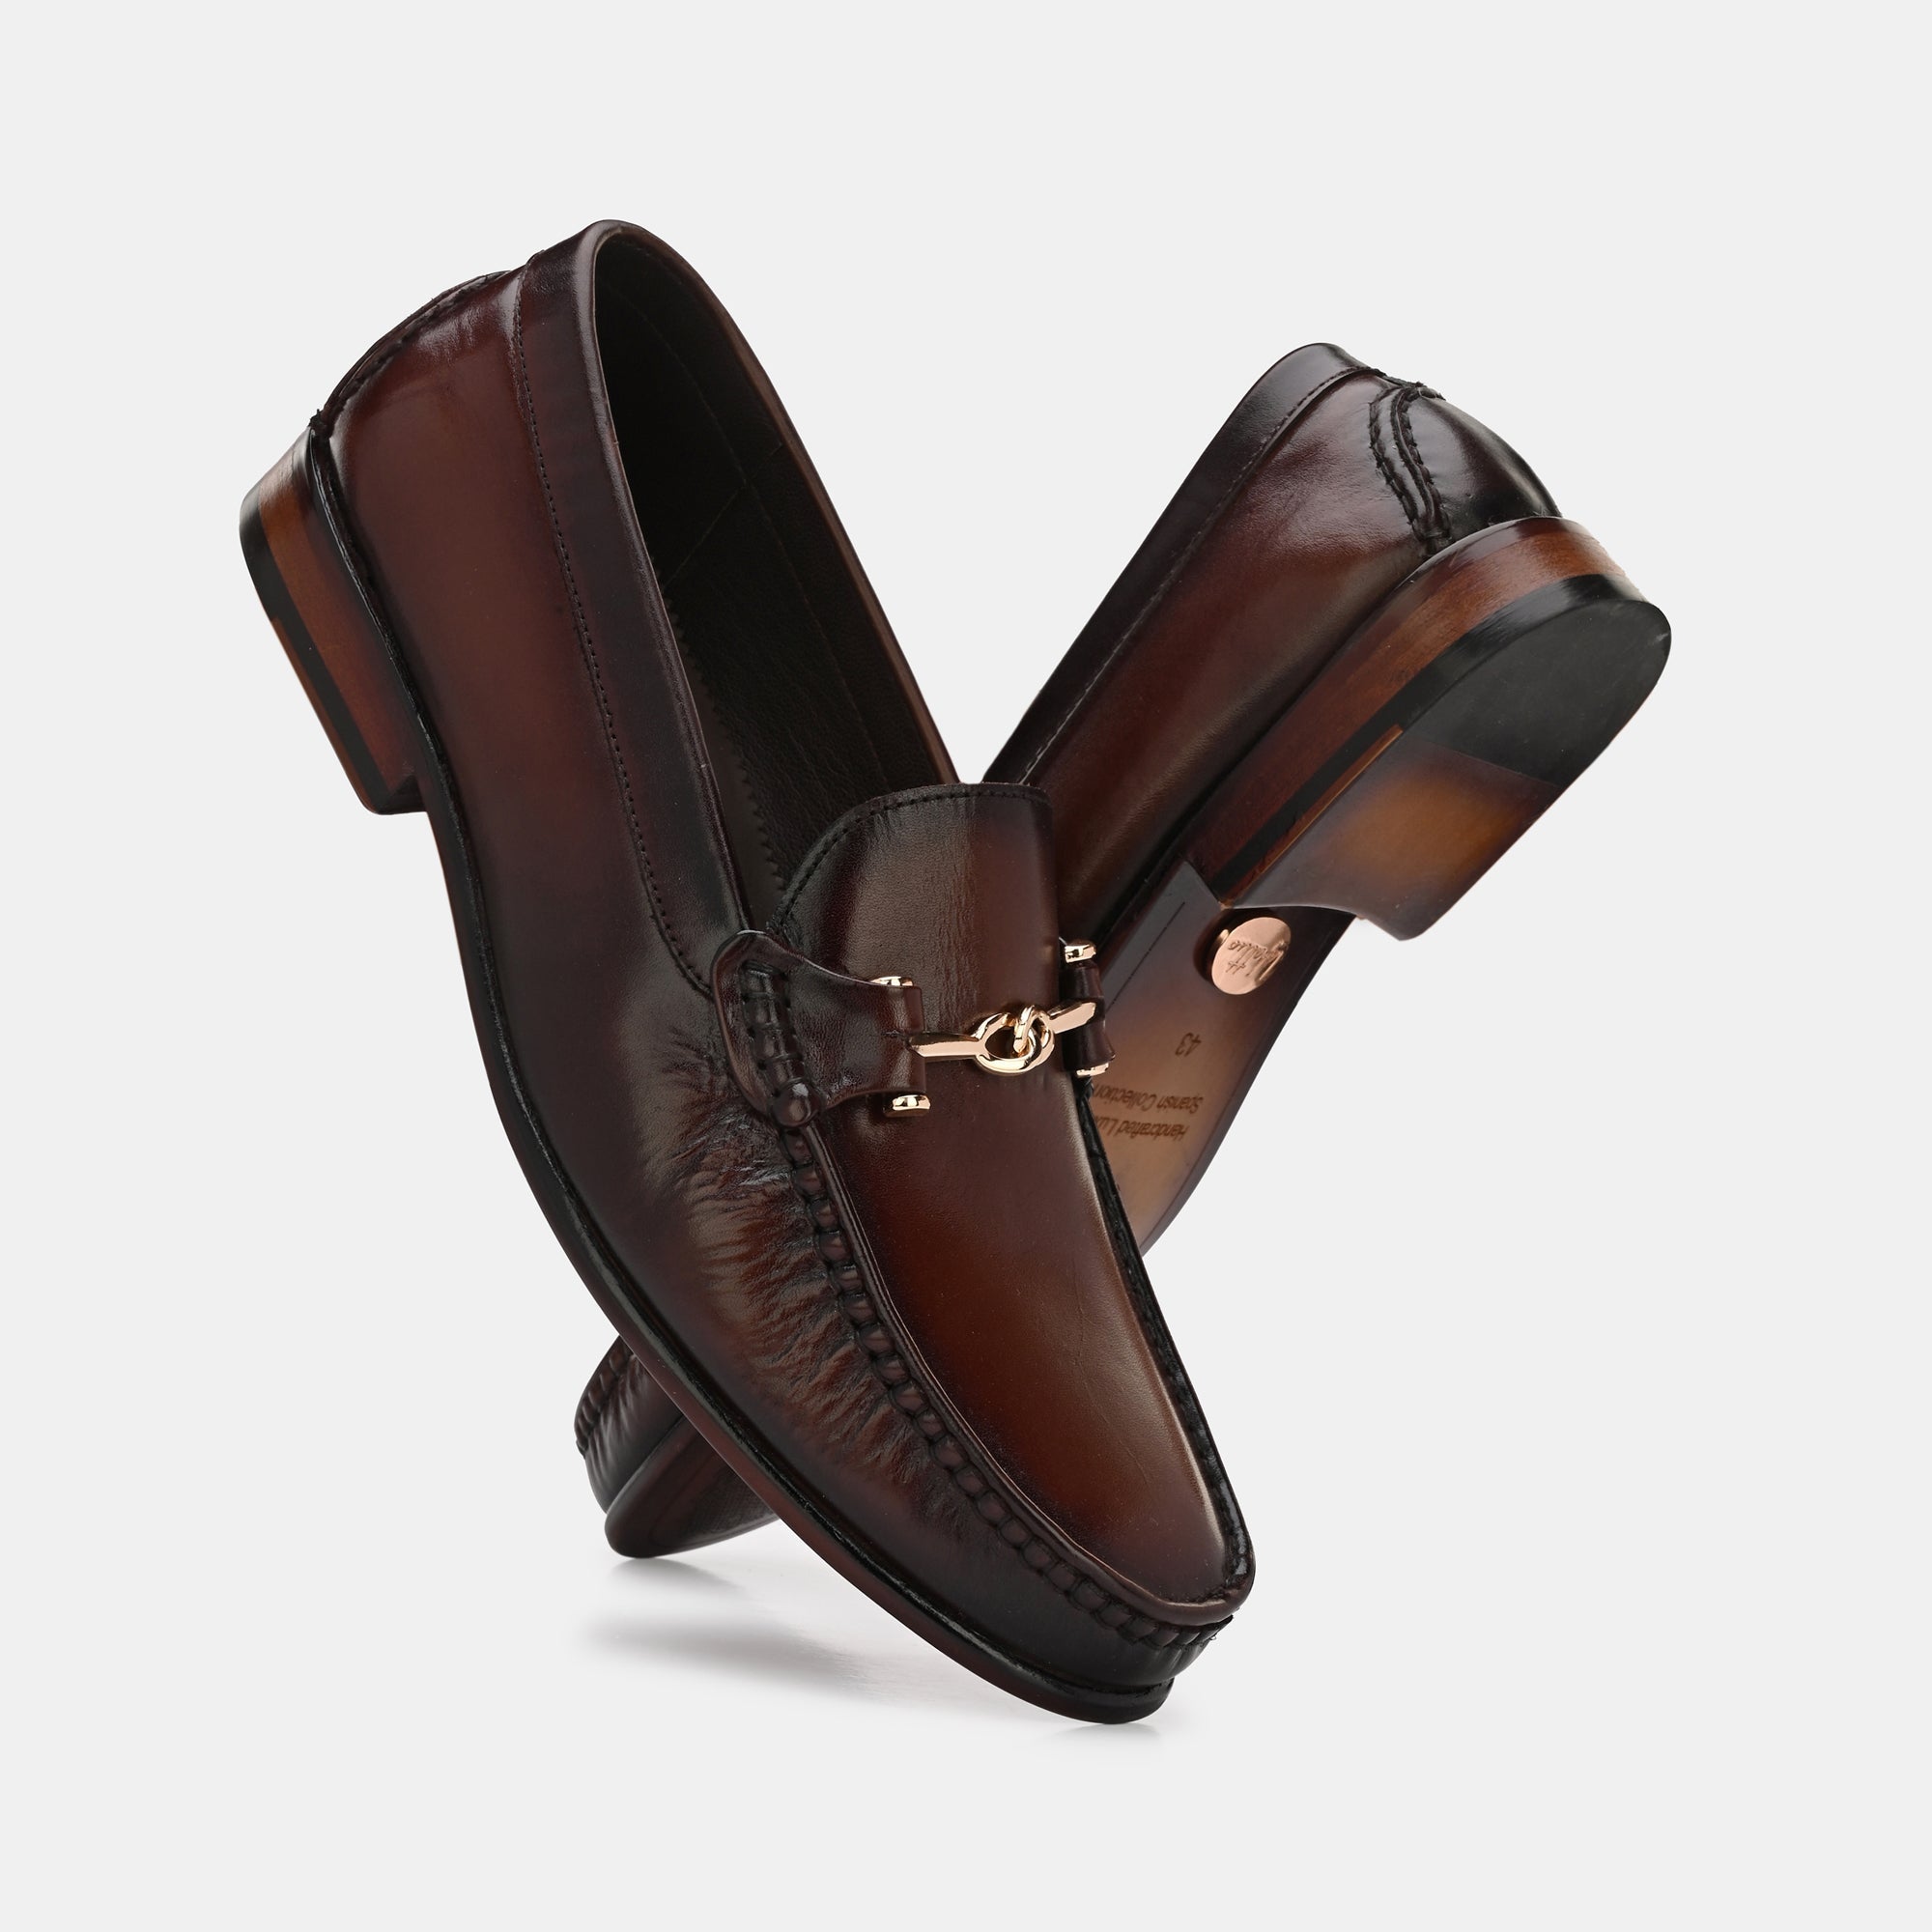 Brown Buckled Loafers by Lafattio